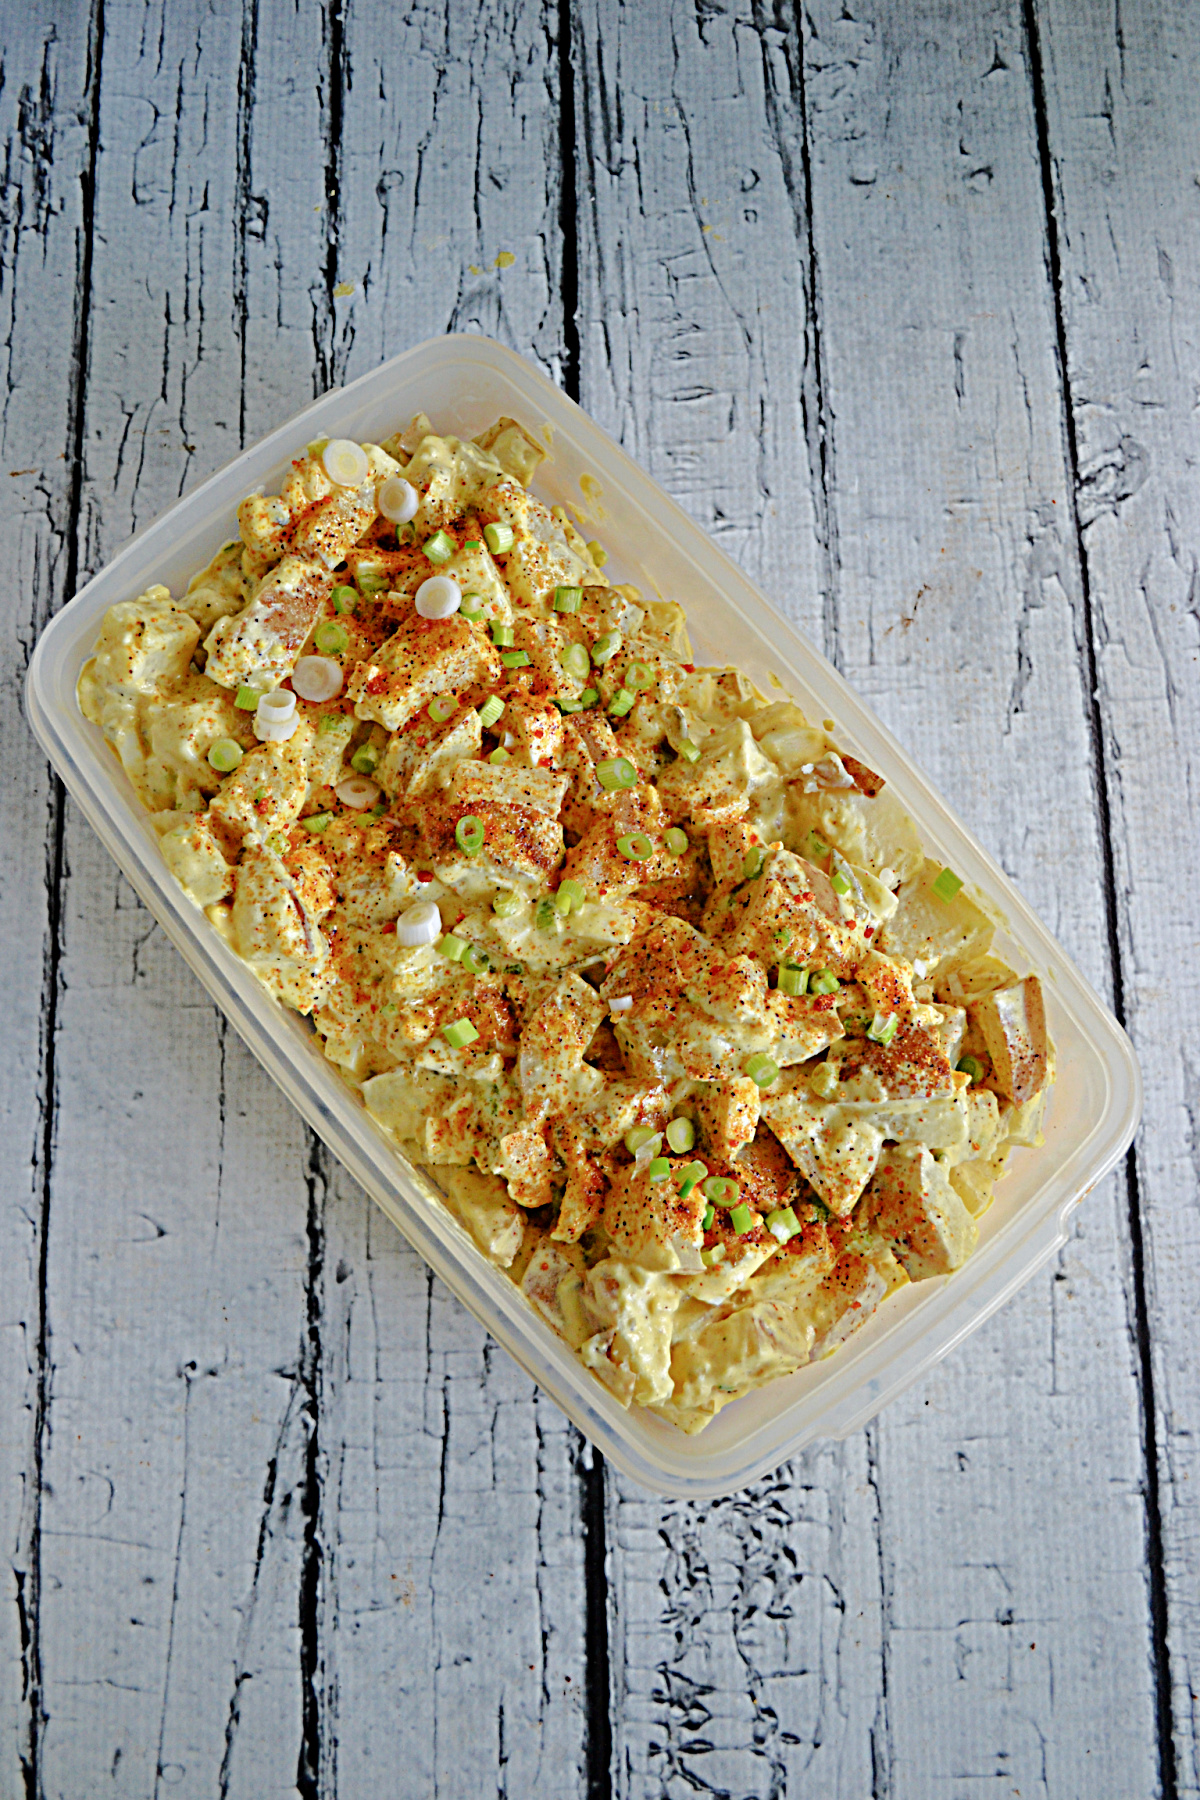 A container filled with potato salad.